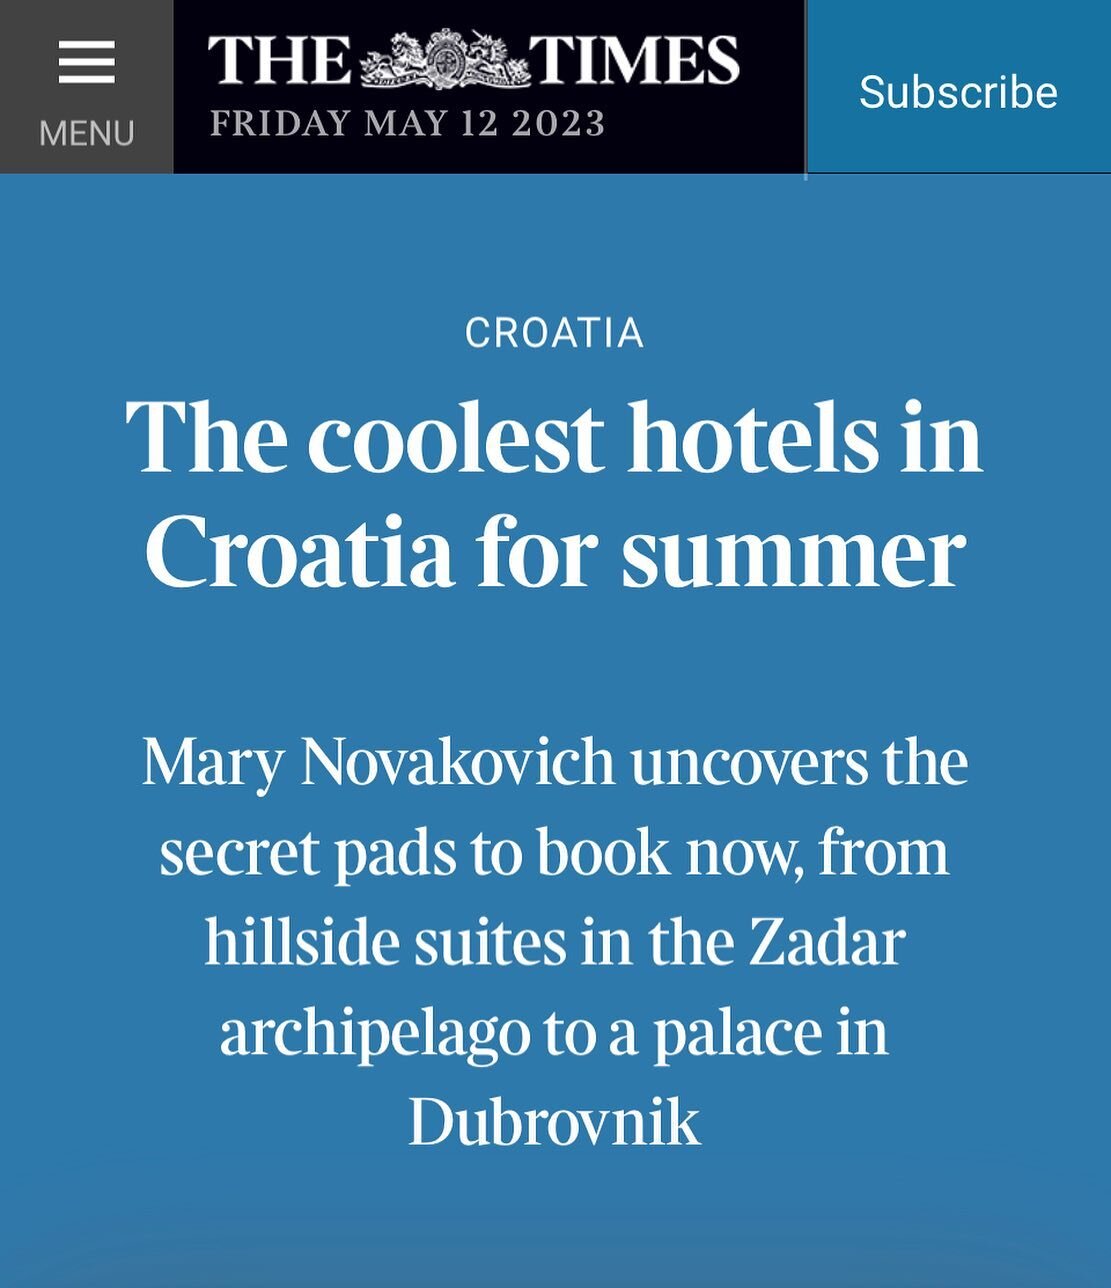 Very pleased to say that The Byron features on this list in tomorrow's U.K. Times. So if you are planning a trip, we'd love to look after you and give you the insiders guide to Dubrovnik. #boutiqueaccomodation #weekendaway #minibreak #gameofthrones #